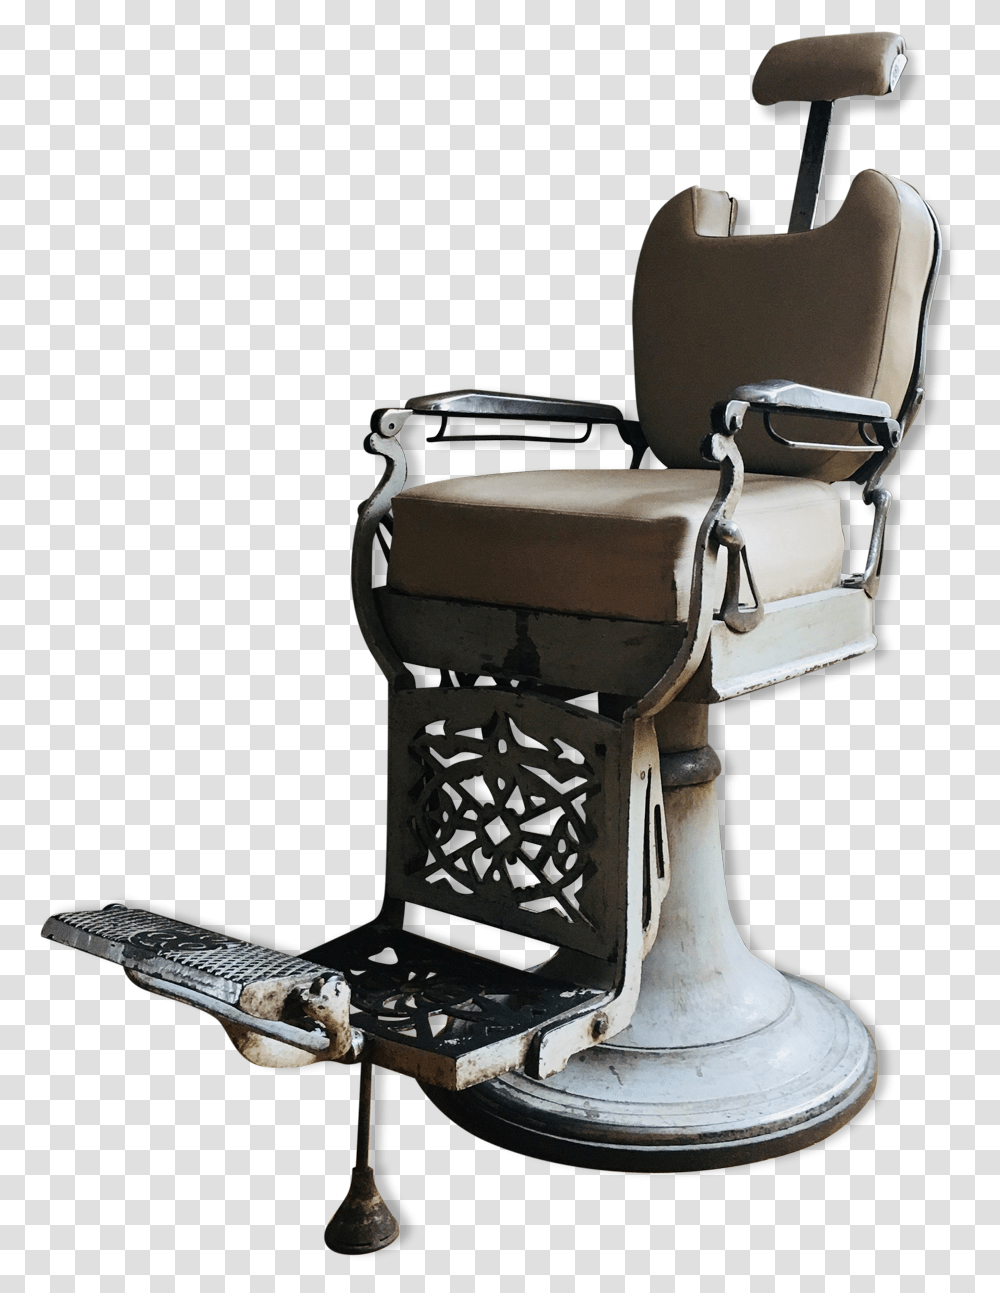 Barber Chair Download Barber Chair, Furniture, Couch, Machine Transparent Png